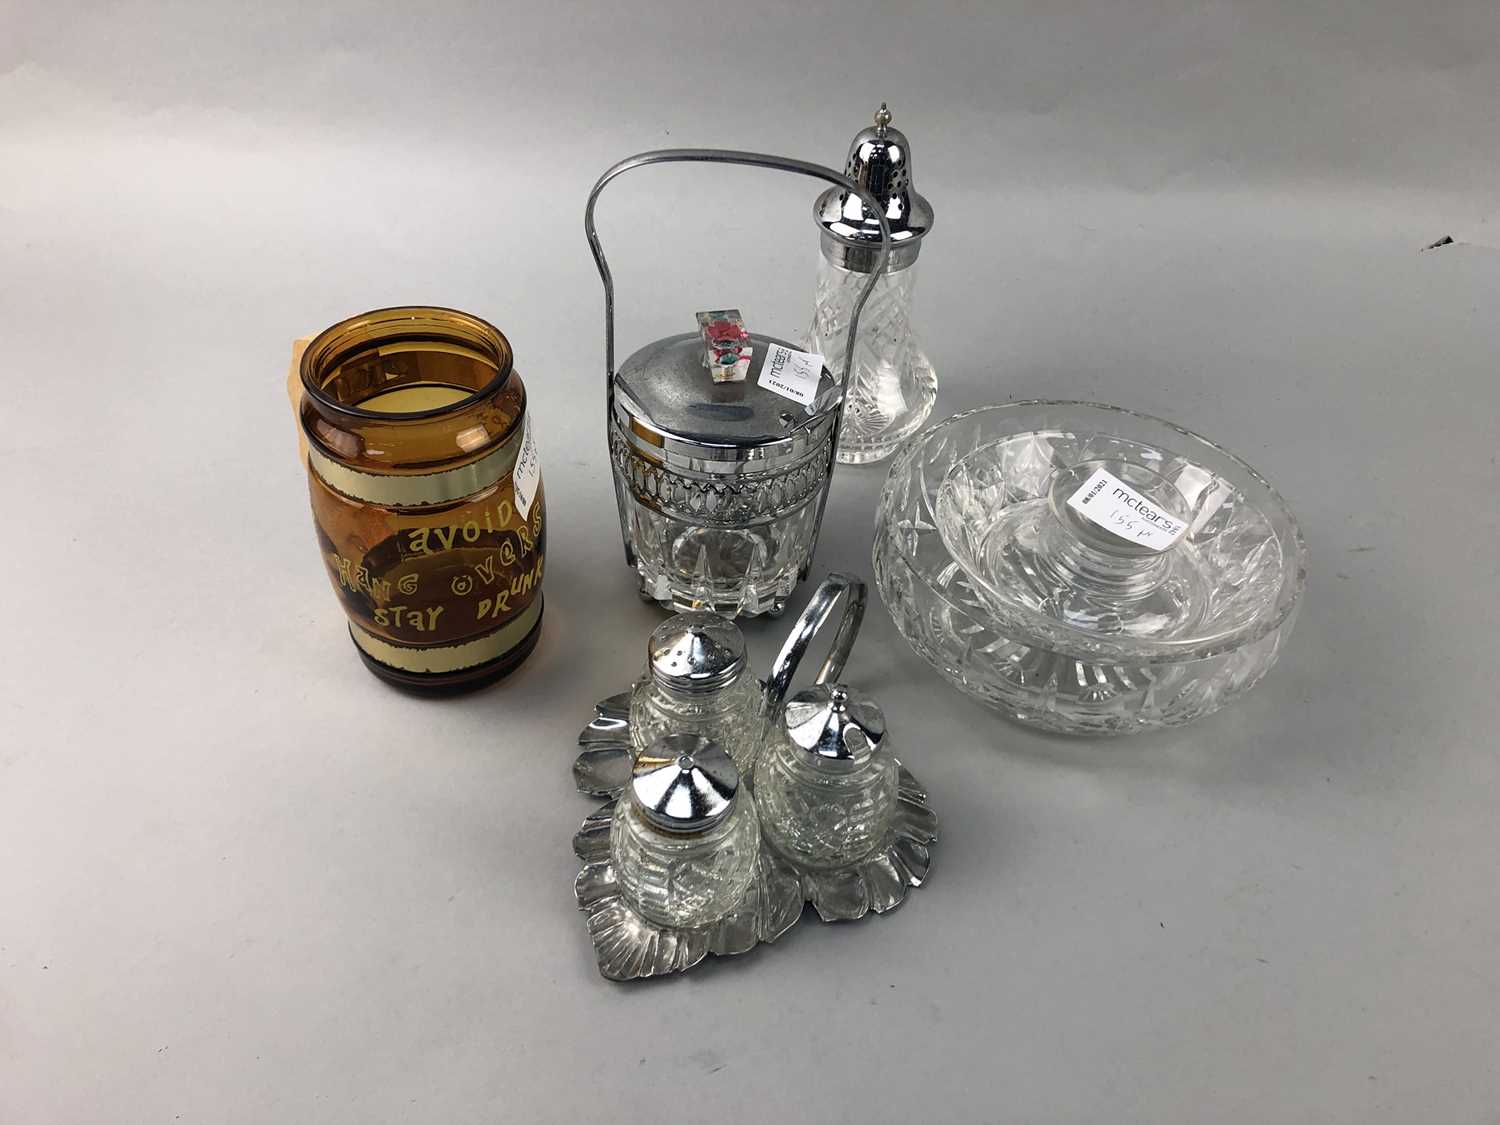 Lot 155 - A PAIR OF BRANDY GLASSES AND OTHER GLASSWARE